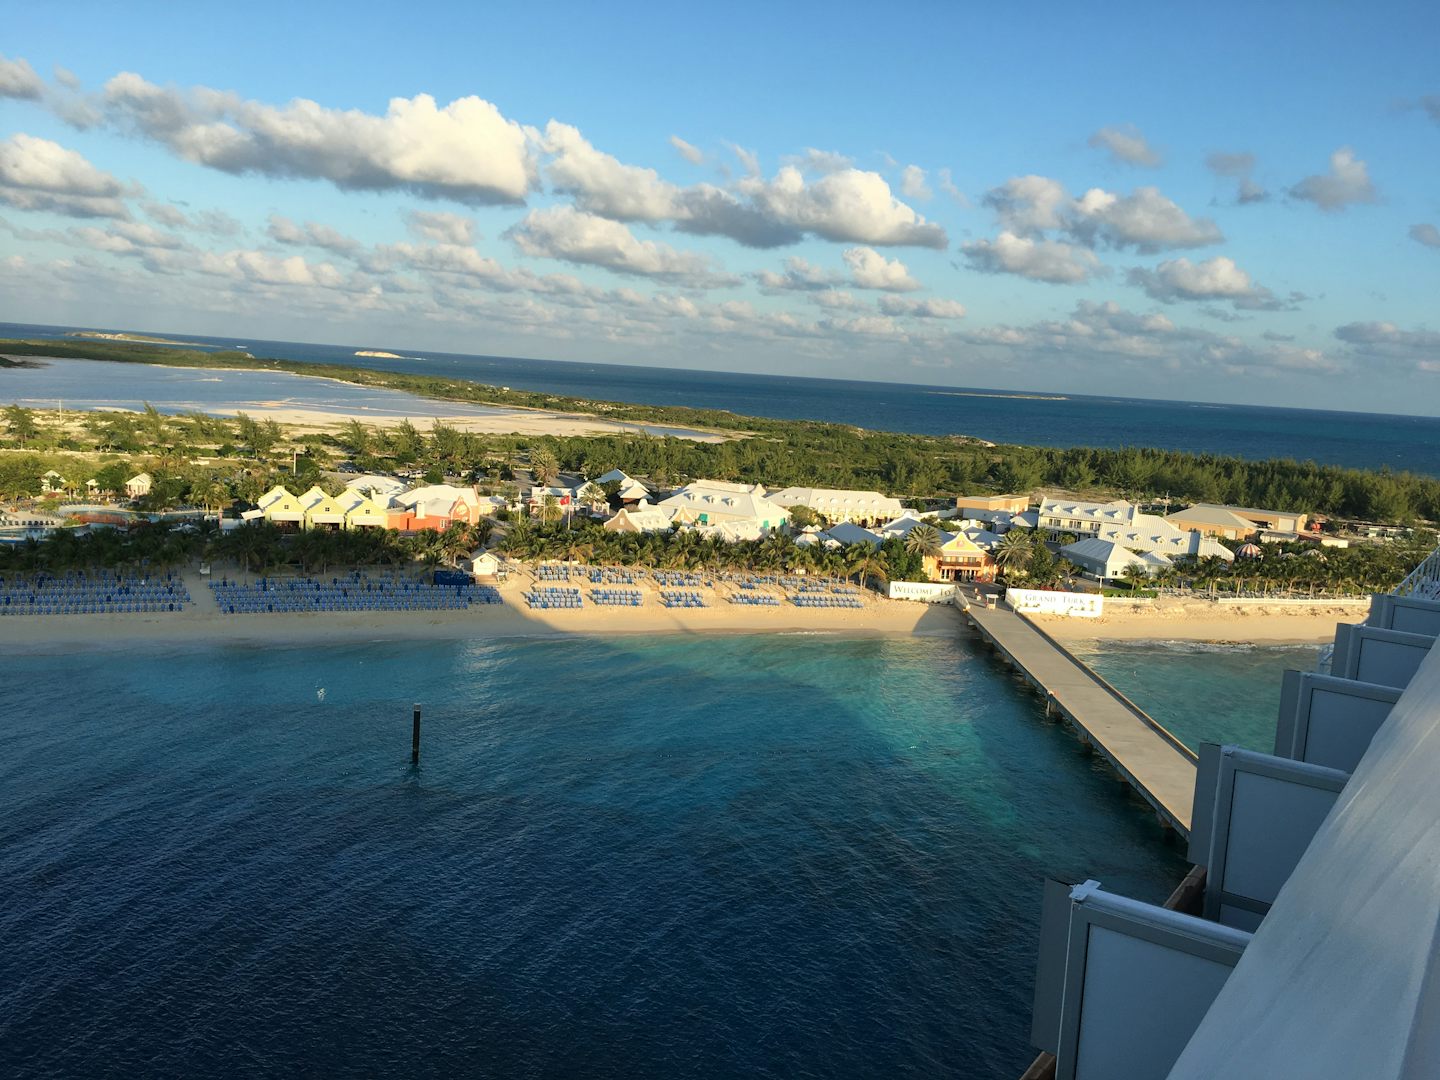 View of Grand Turk from the ship